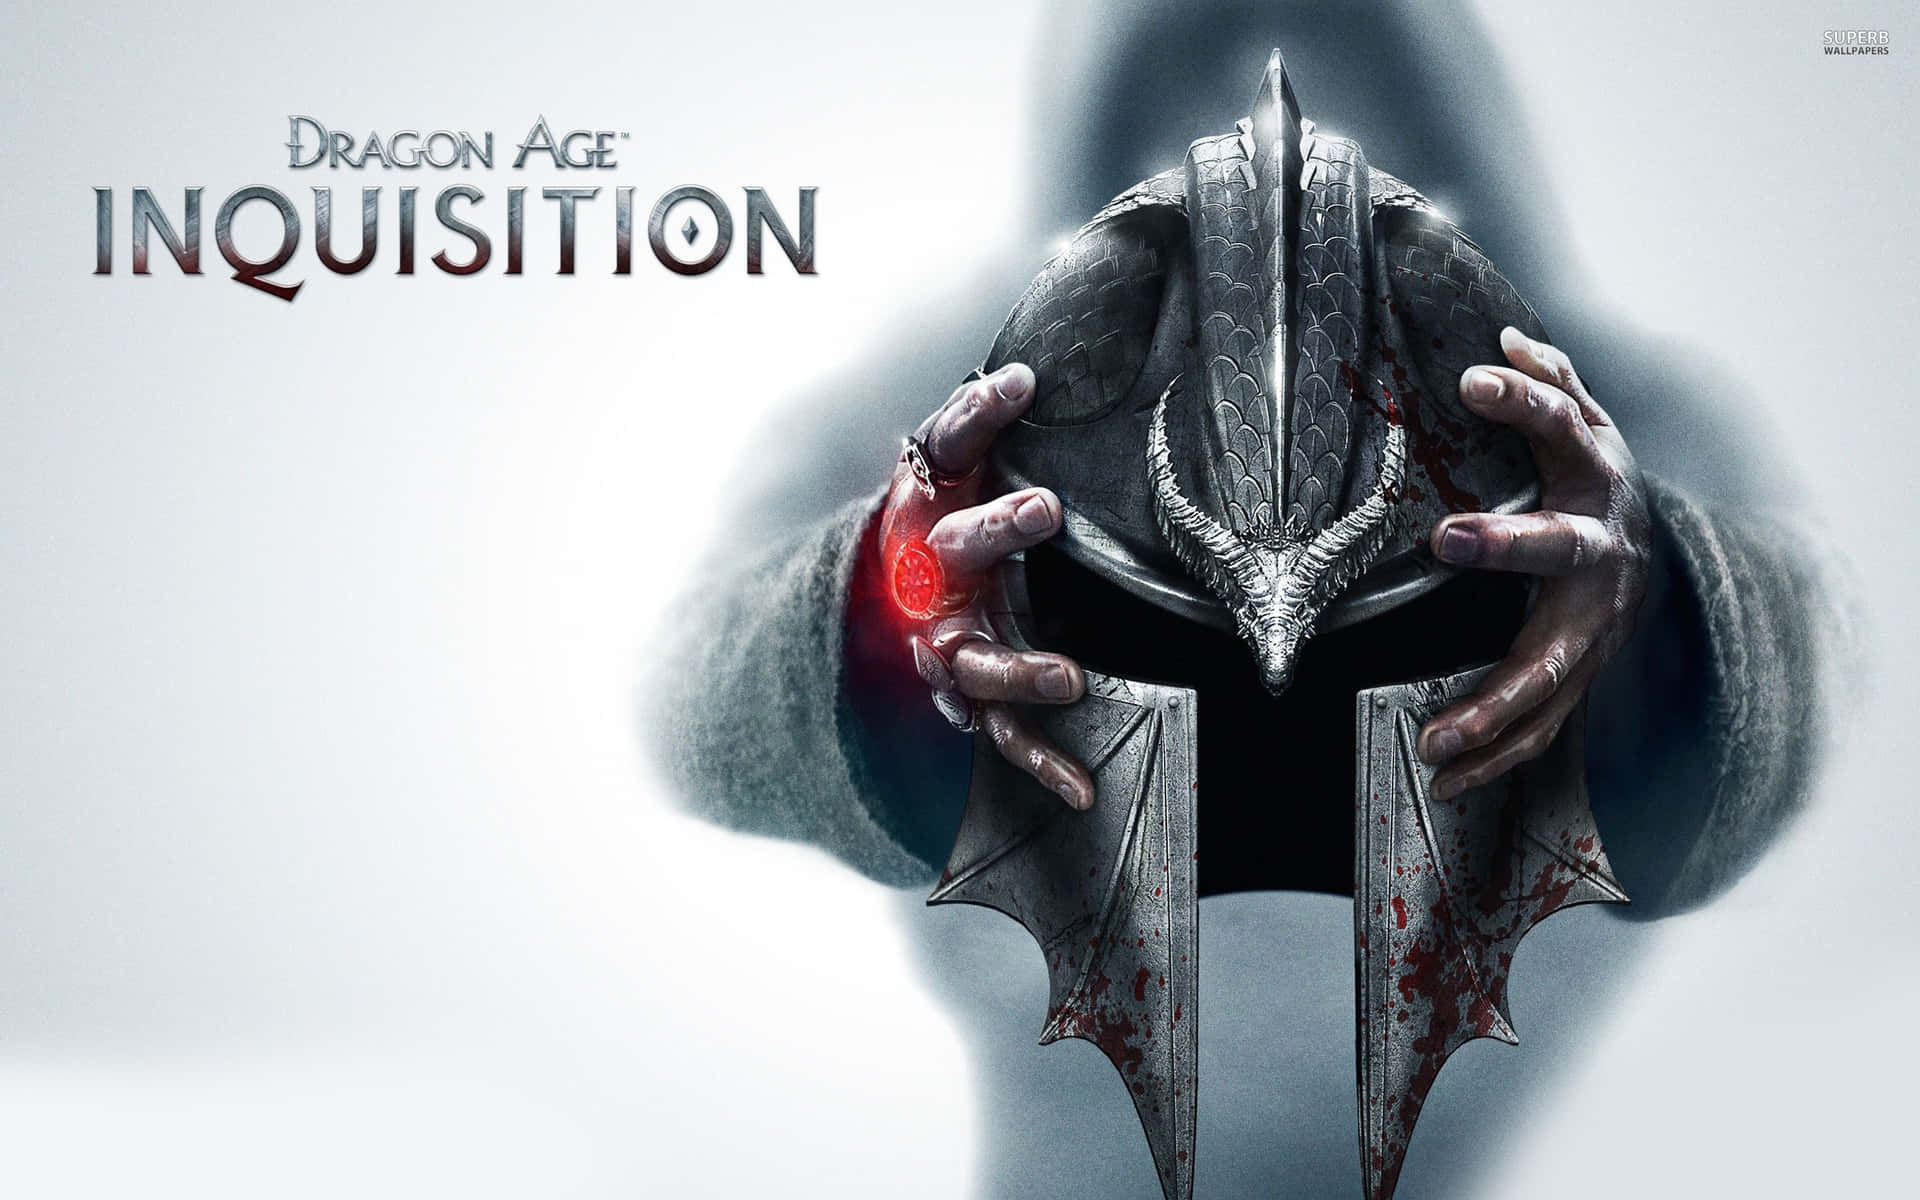 The Brave Heroes of Dragon Age Inquisition